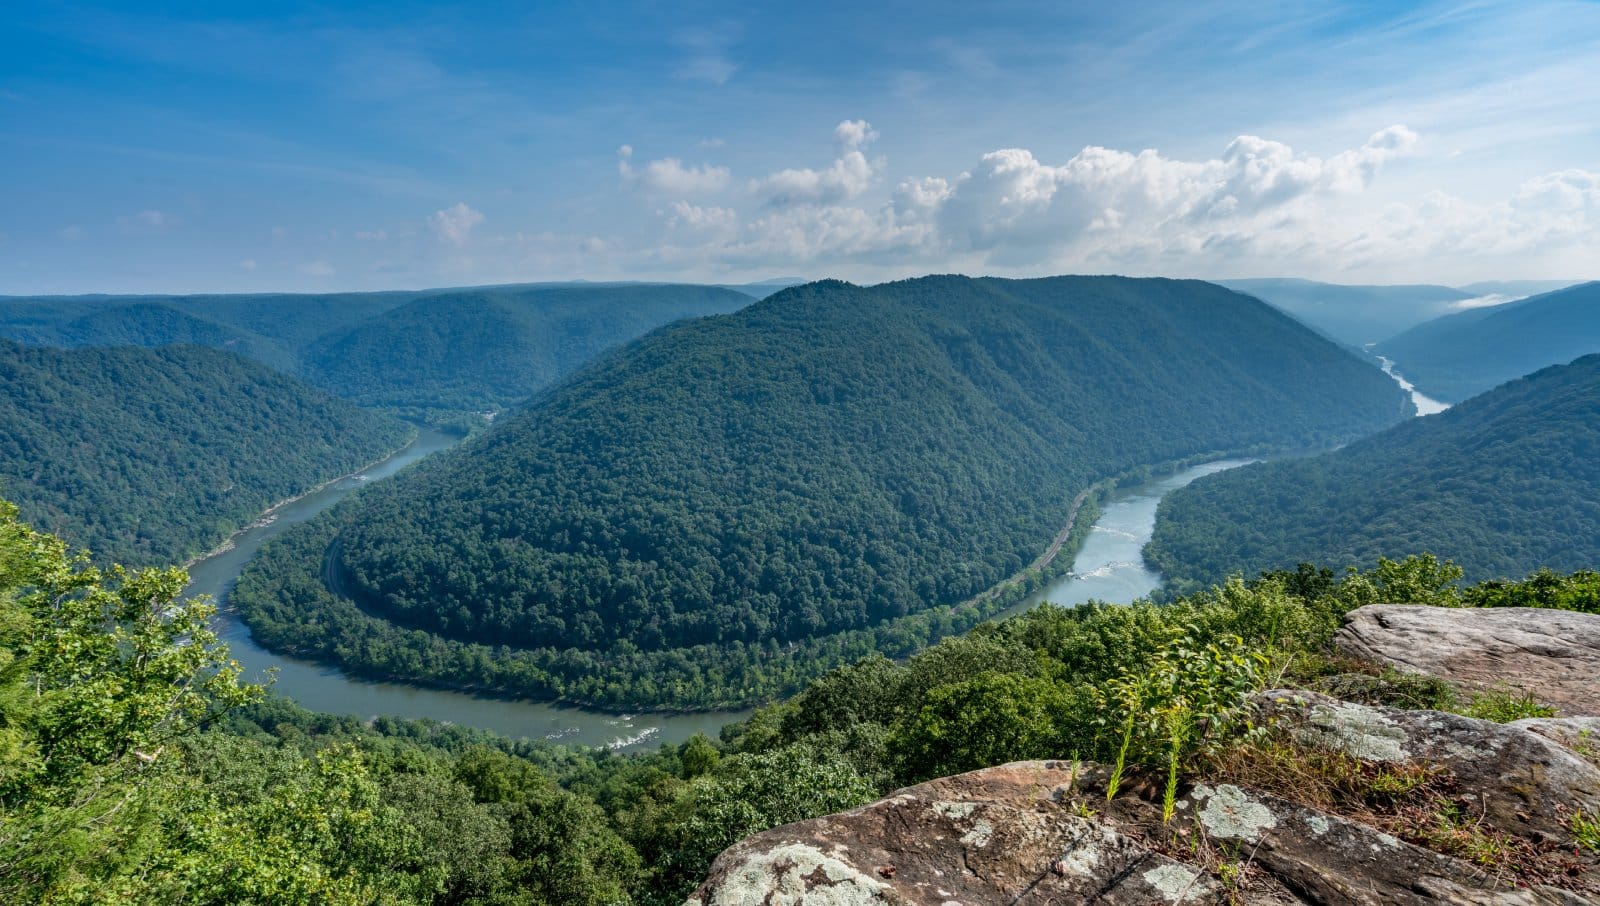 <p class="wp-caption-text">Image Credit: Shutterstock / Steve Heap</p>  <p><span>Coal mining history might cloud its image, but West Virginia’s lush mountains and thrilling outdoor activities like whitewater rafting are unmatched.</span></p>